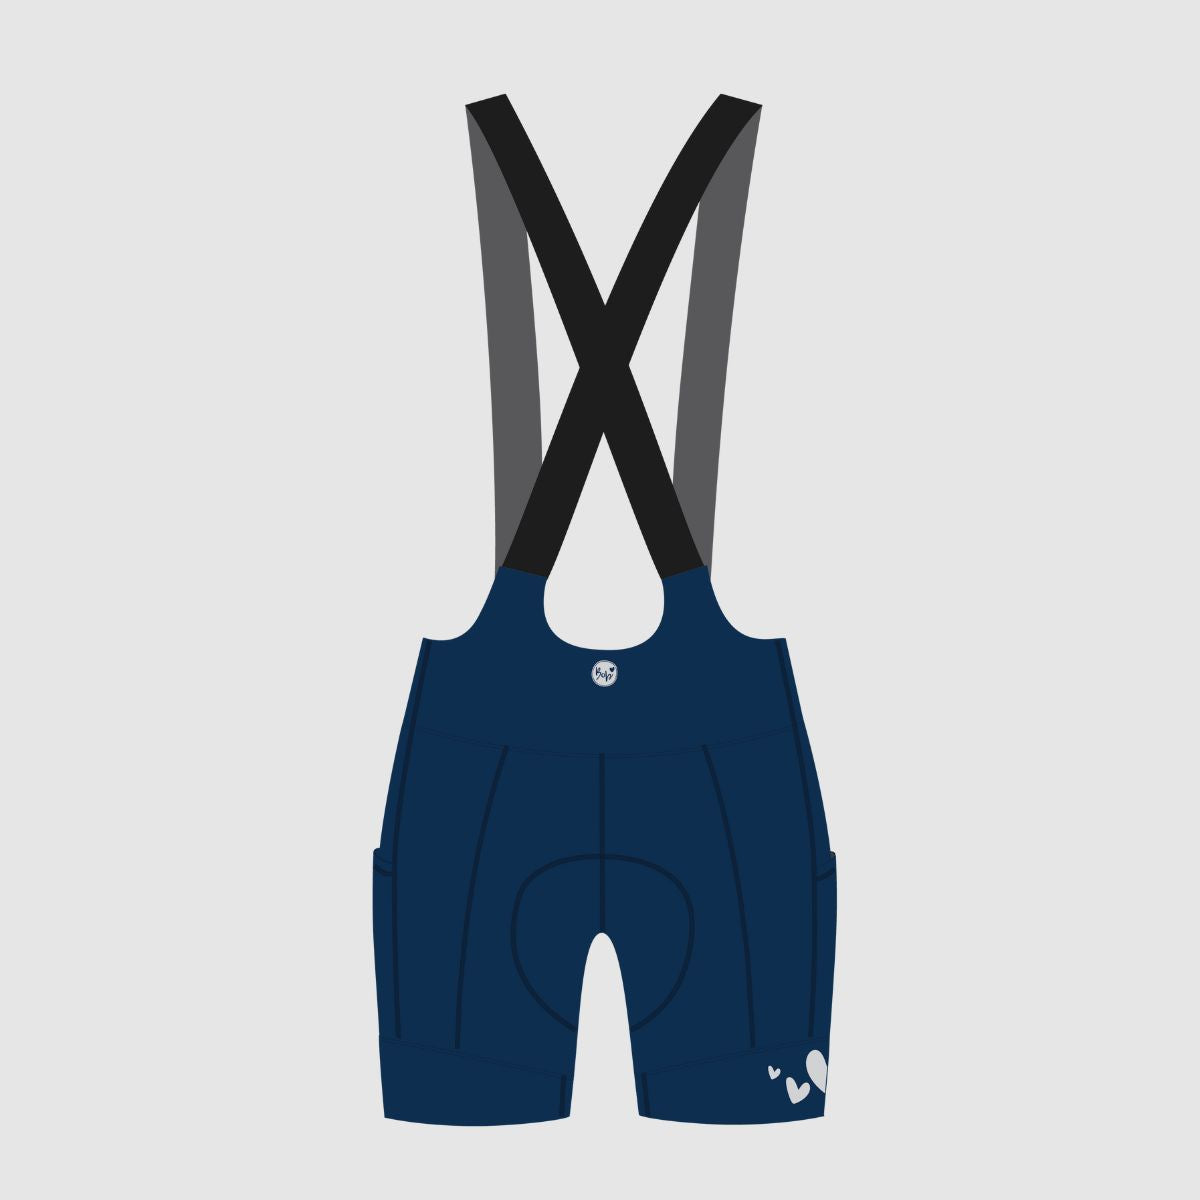 Tech drawing of women's bib shorts with pockets in a blue colour front side